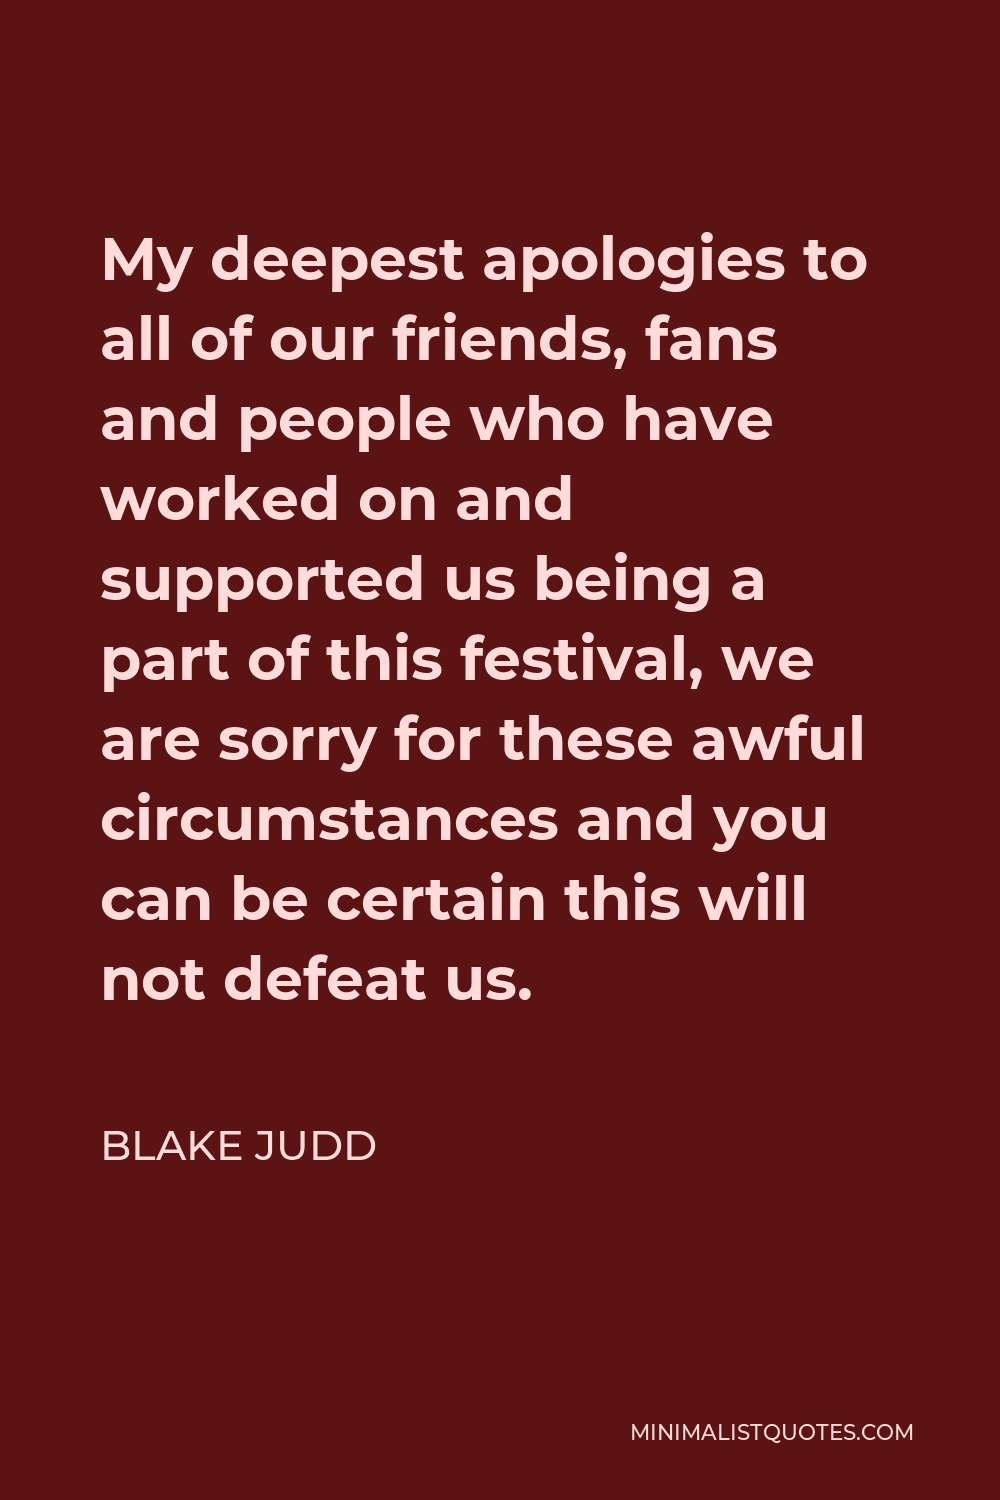 Blake Judd Quote - My deepest apologies to all of our friends, fans and people who have worked on and supported us being a part of this festival, we are sorry for these awful circumstances and you can be certain this will not defeat us.